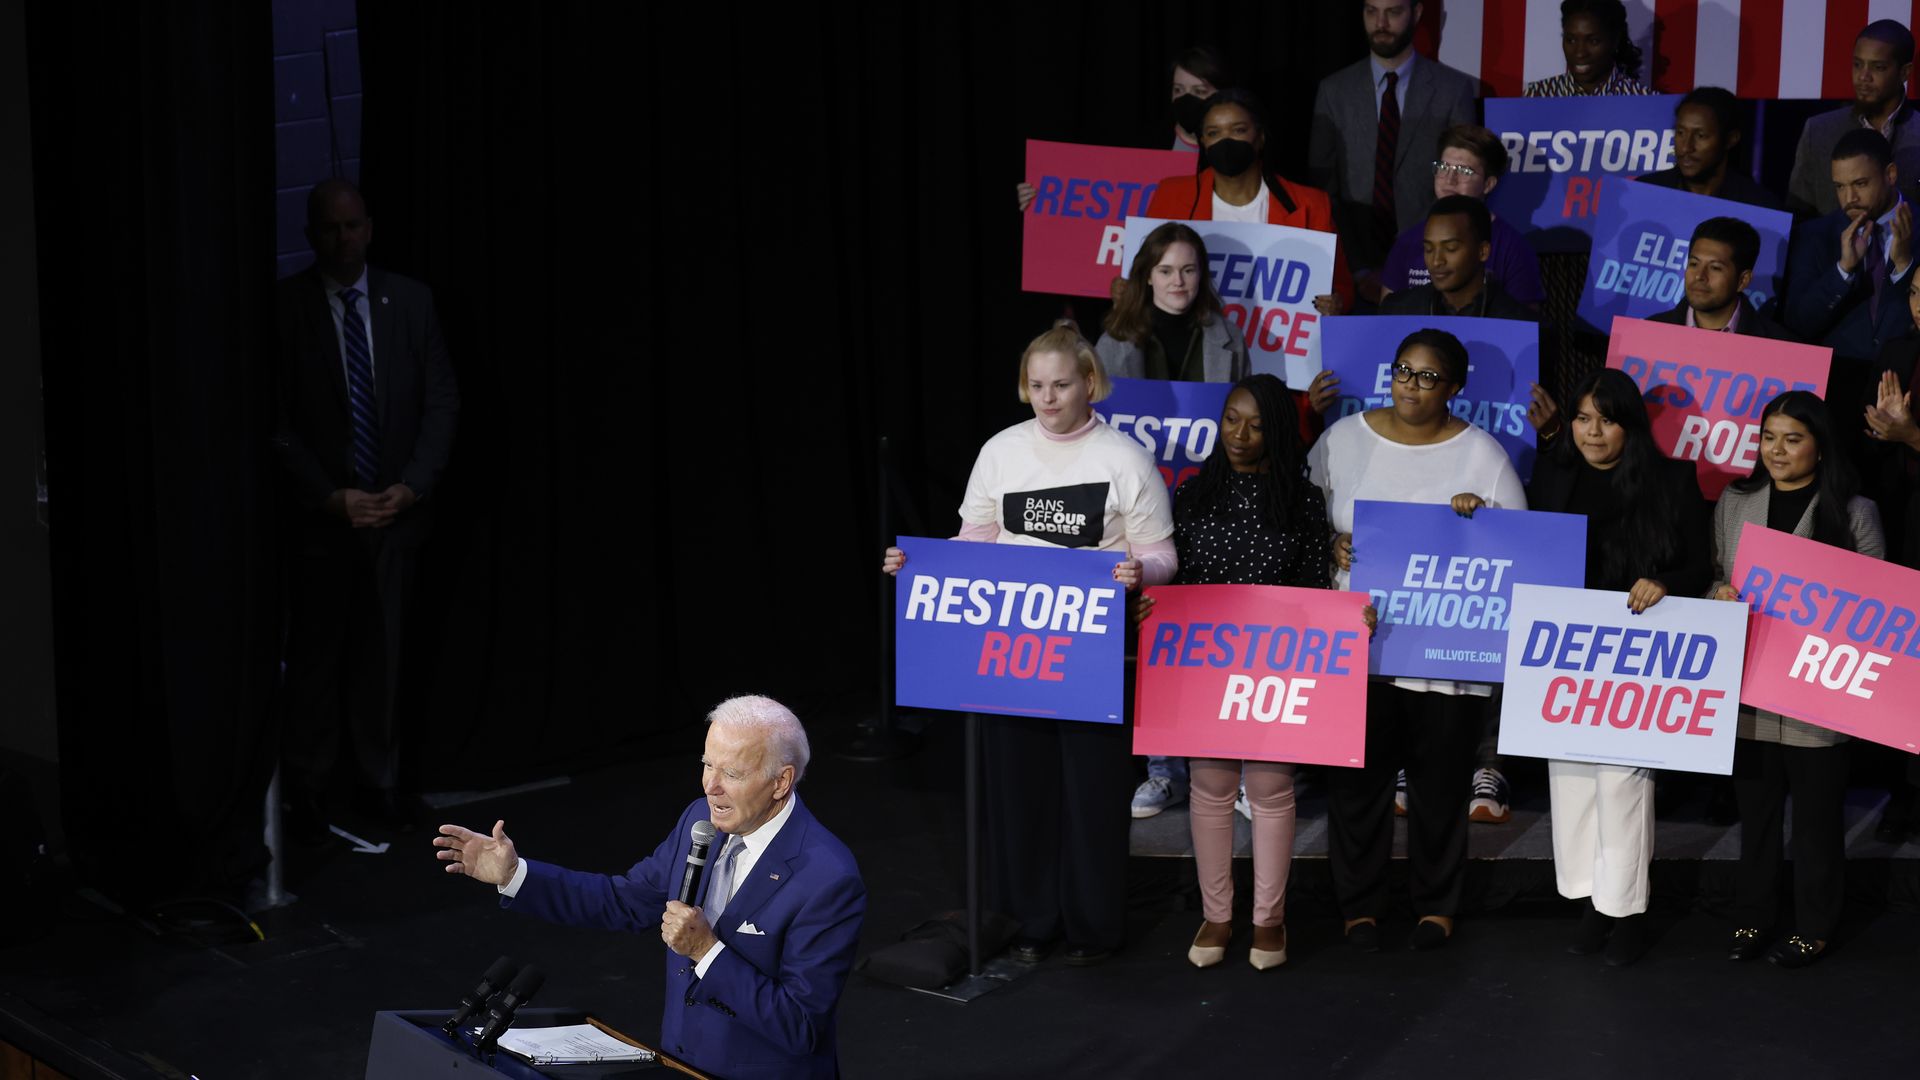 U.S. President Joe Biden speaks at a Democratic National Committee event with people behind him on stage holding pro-abortion rights signs.